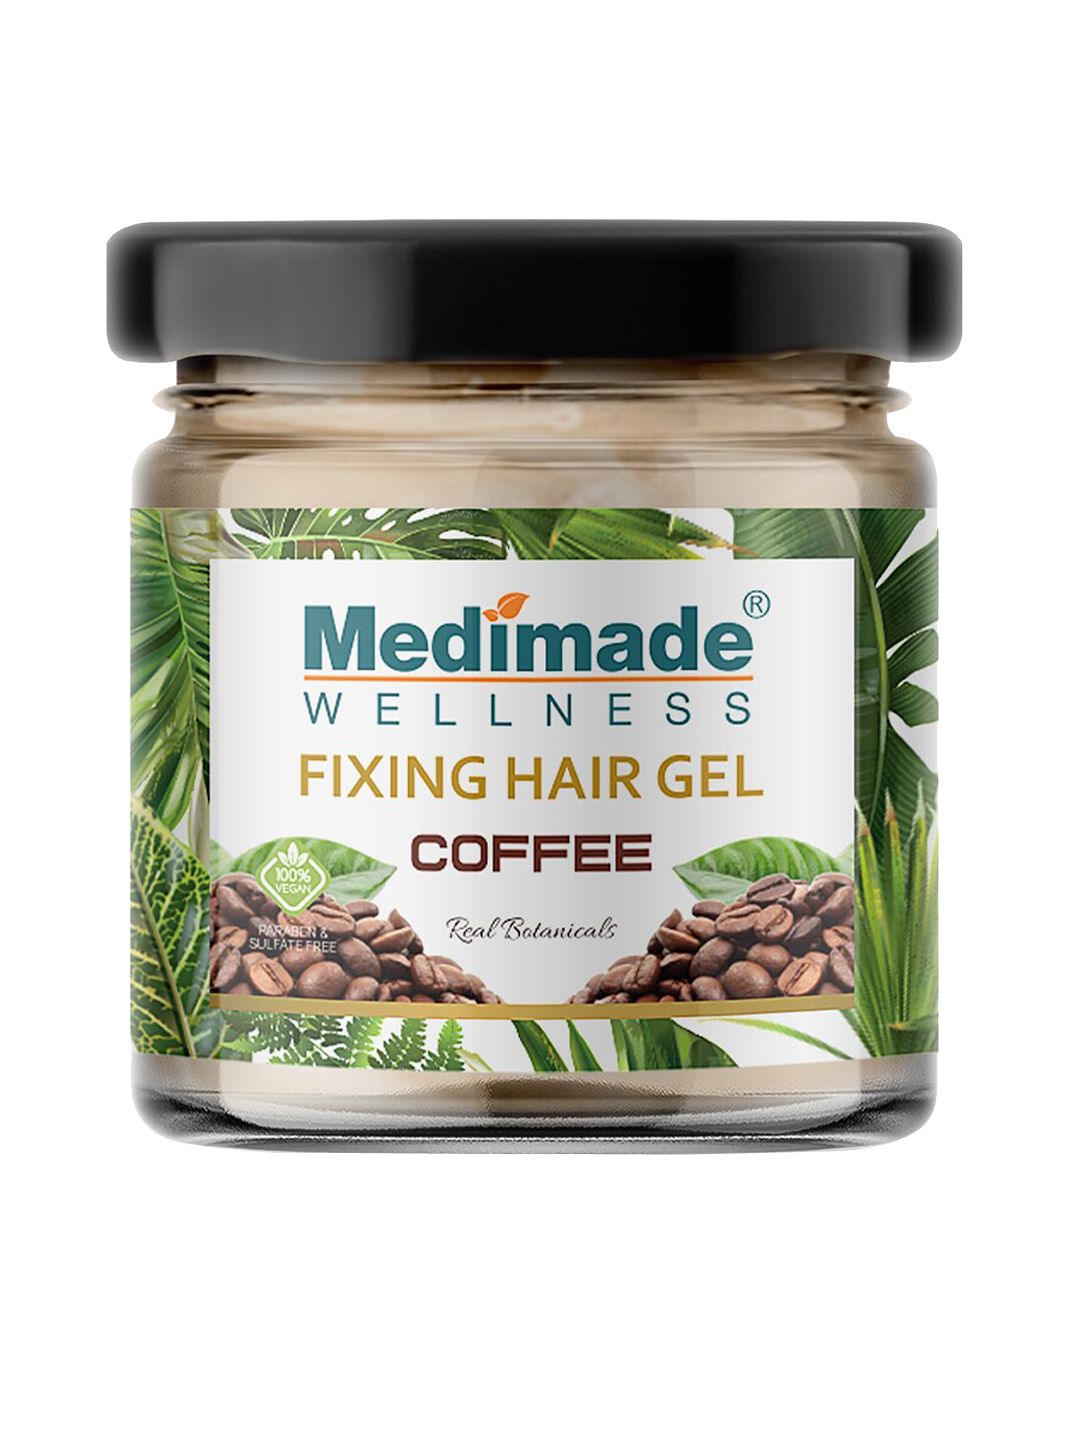 Medimade Real Botanicals Coffee Fixing Hair Gel with Vitamin E & Pro Vitamin B5 - 30 g Price in India